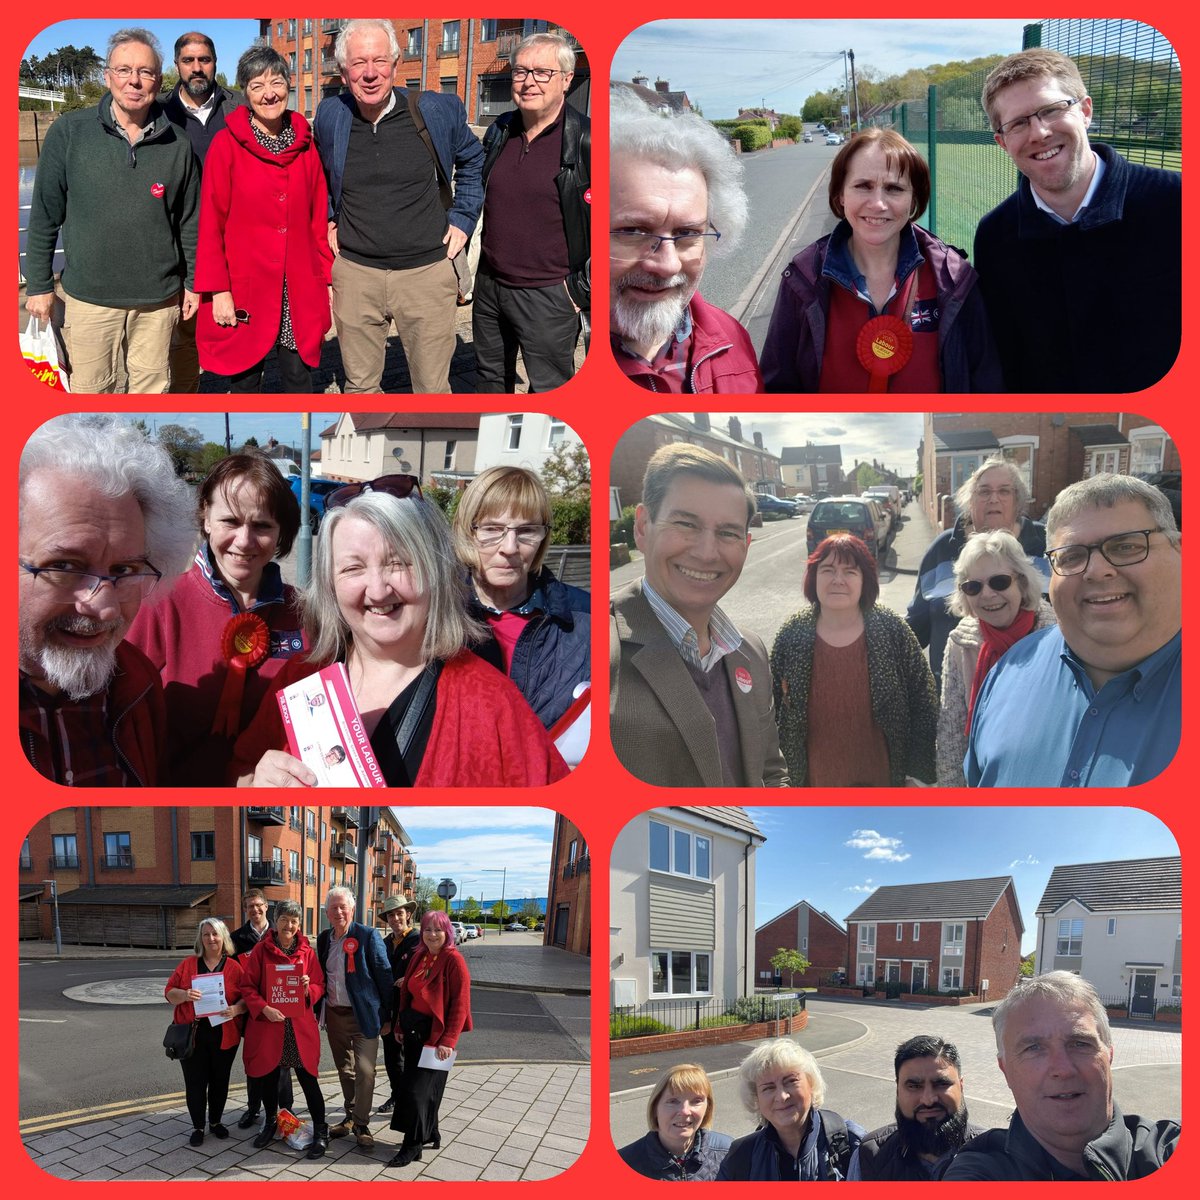 Wow what a Super Saturday we had today all over the City. Thanks for the warm welcome. Use your vote to support Labour Candidates ❌️ to form a Labour City Council. #Cathedral #nunnery #rainbowhill #stjohns #Worcester #doorsteps